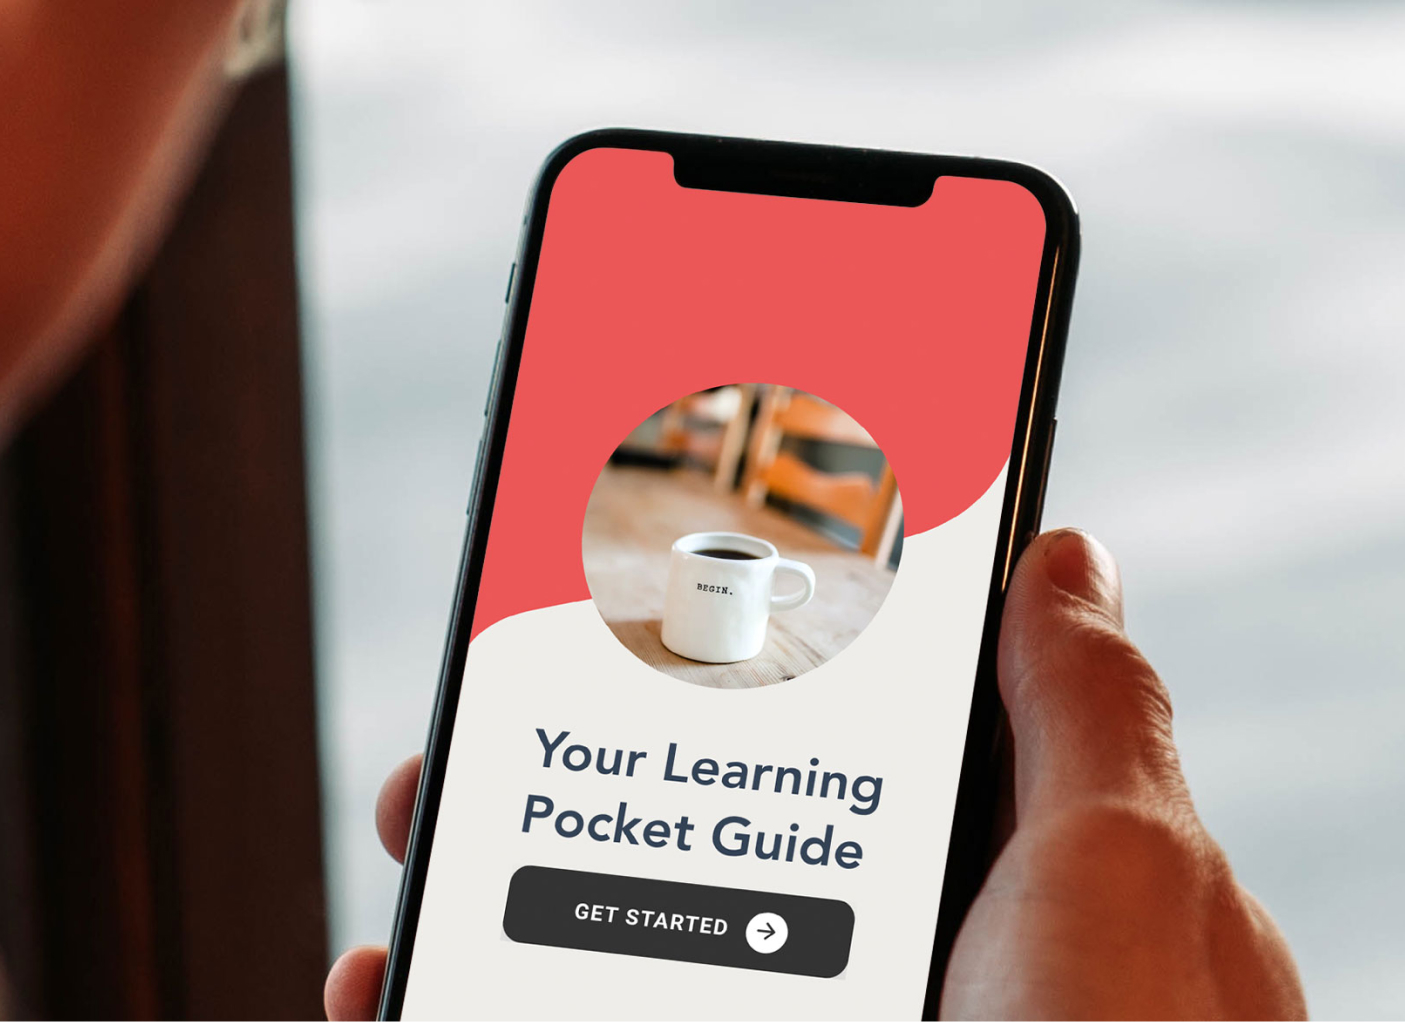 Designing a mobile pocket guide for learning on-the-go